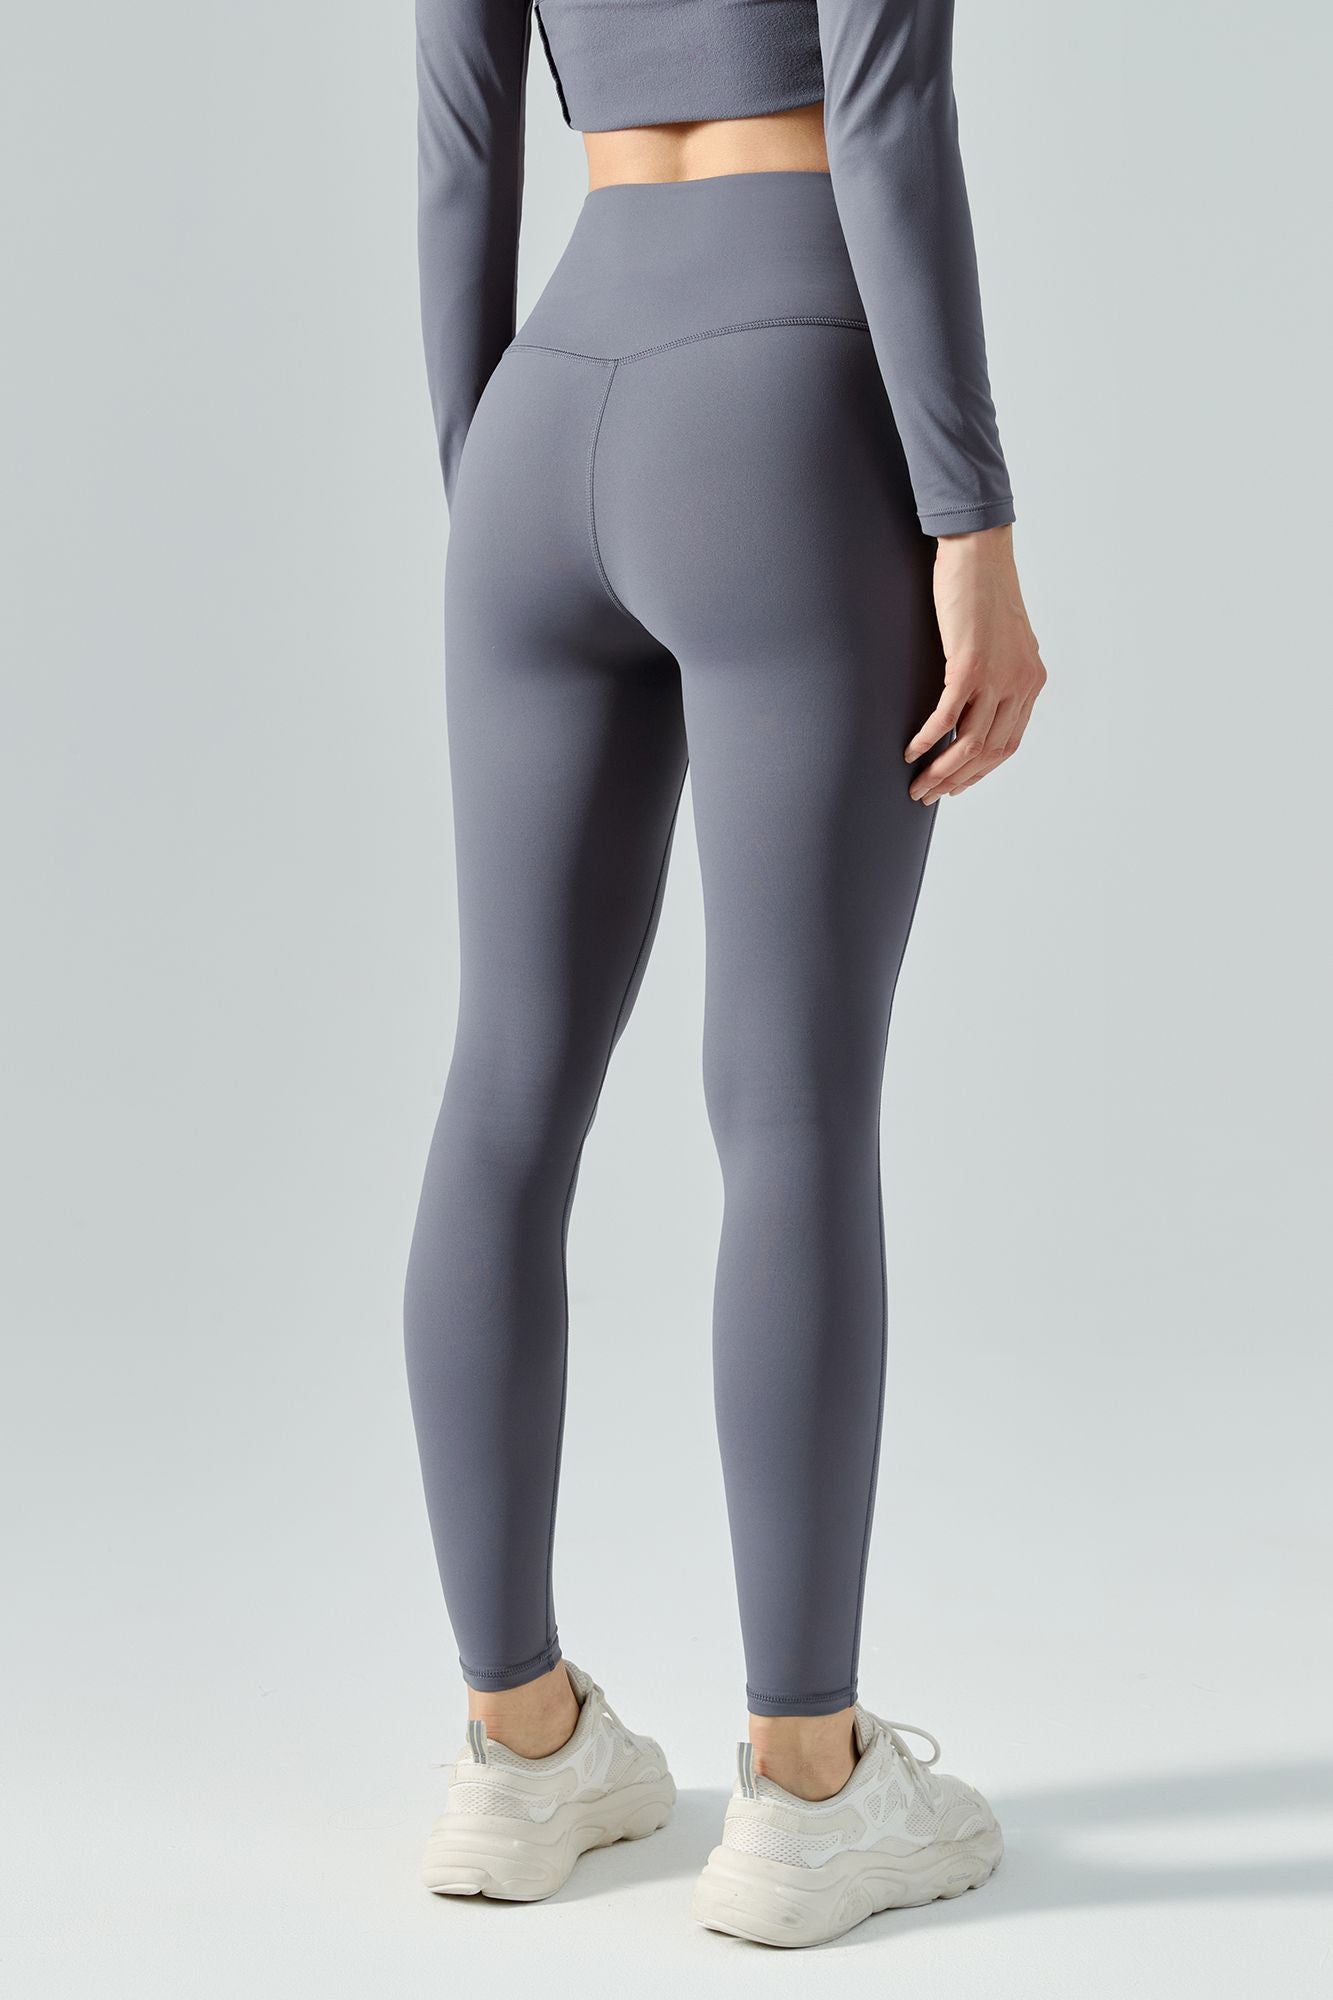 Women's New Mix Brand Solid Color Seamless Fleece Lined Legg (7316613)